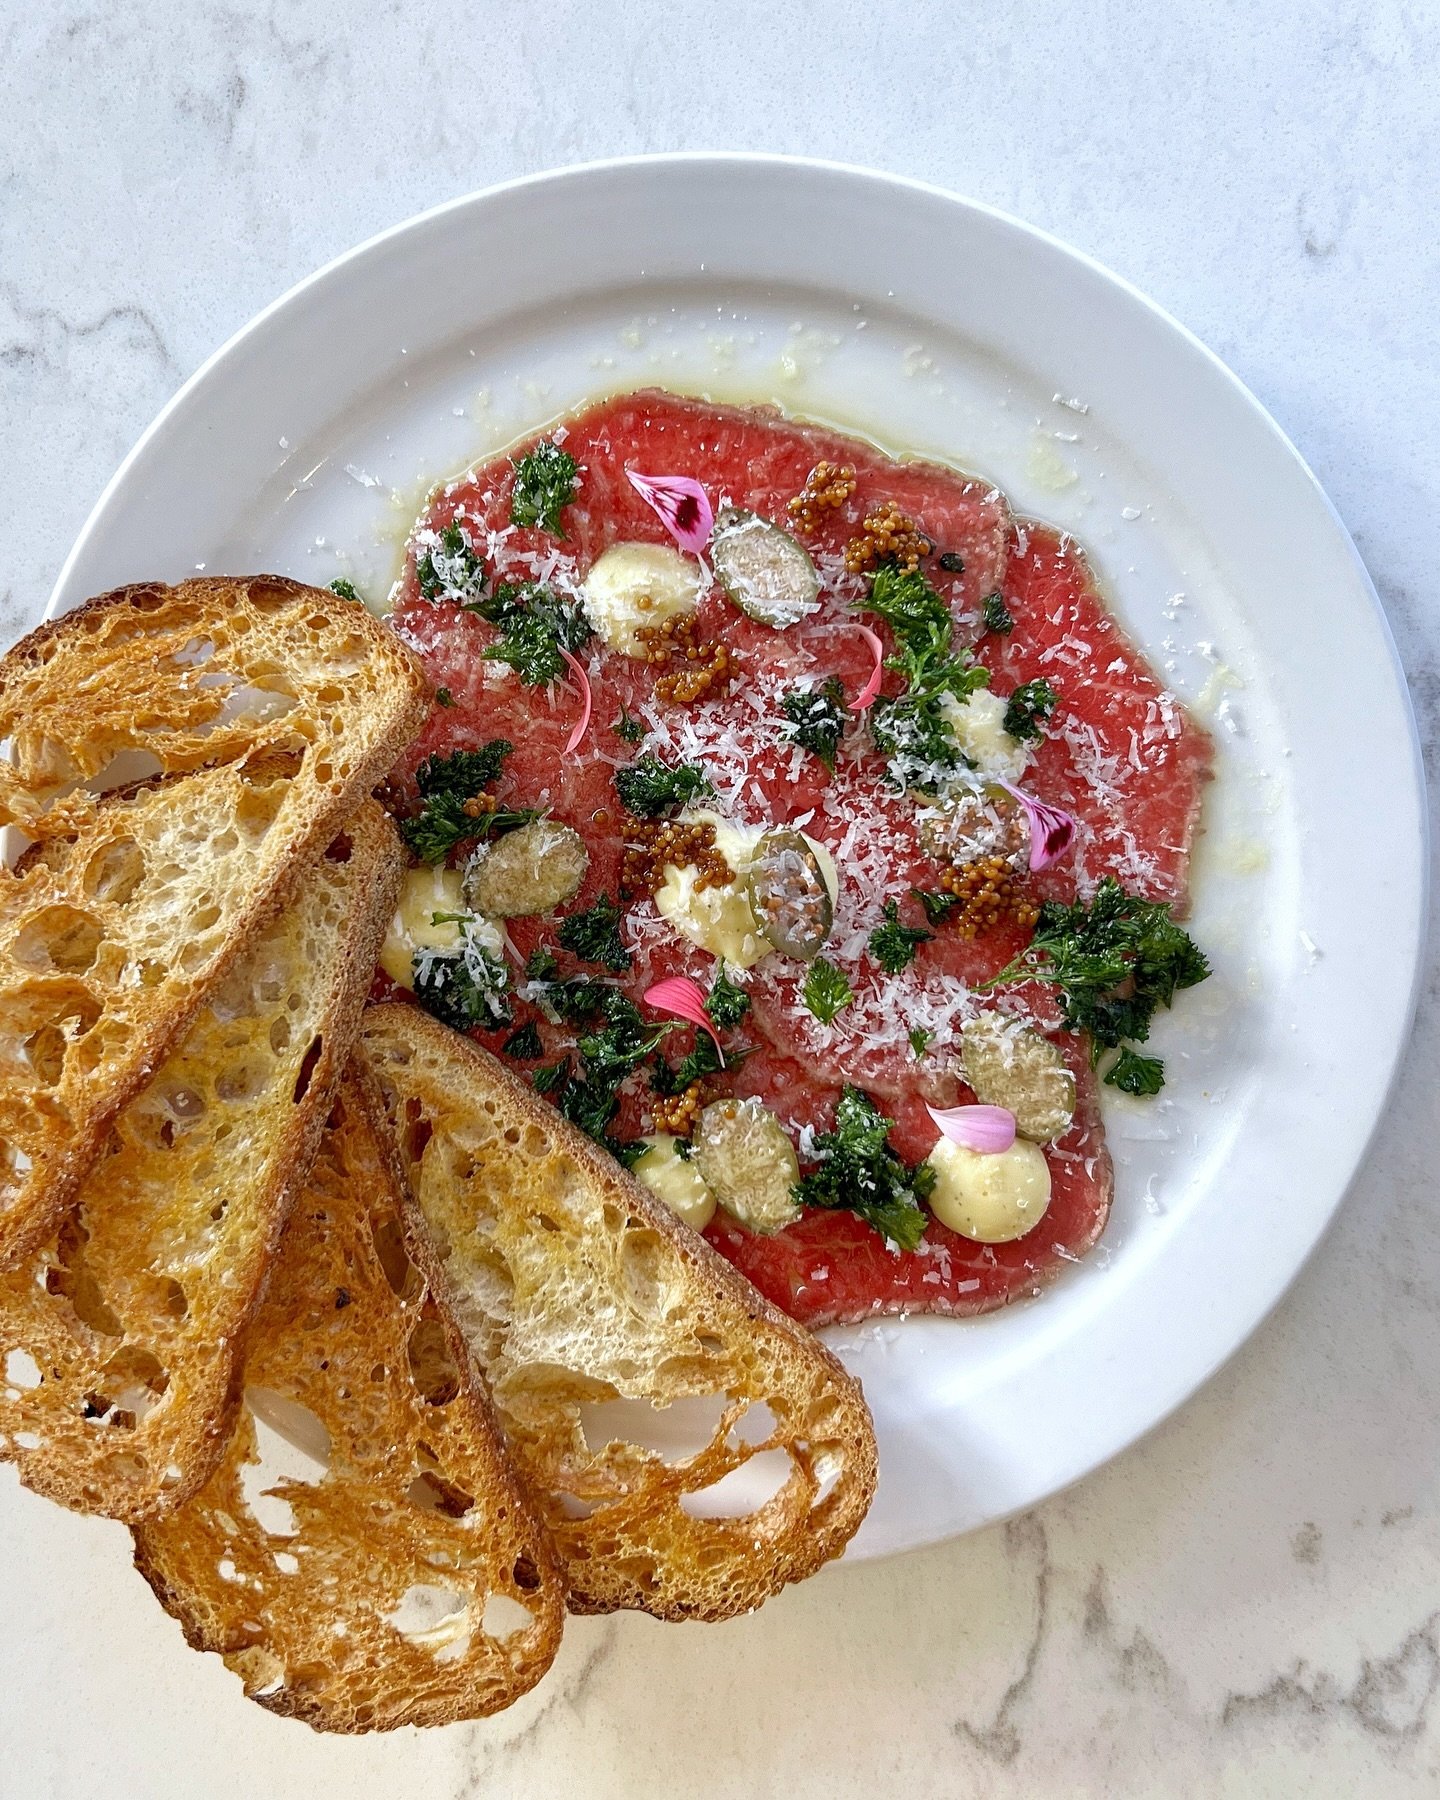 Dare you to order just one! &gt; 🥩 BEEF CARPACCIO 🥩&gt;&gt; thinly sliced rare beef, pecorino, fried parsley, caper berries, dijon aioli, pickled mustard seeds, sourdough crostini &gt; team favourite snack at The Canteen! See you for dinner! 

#can